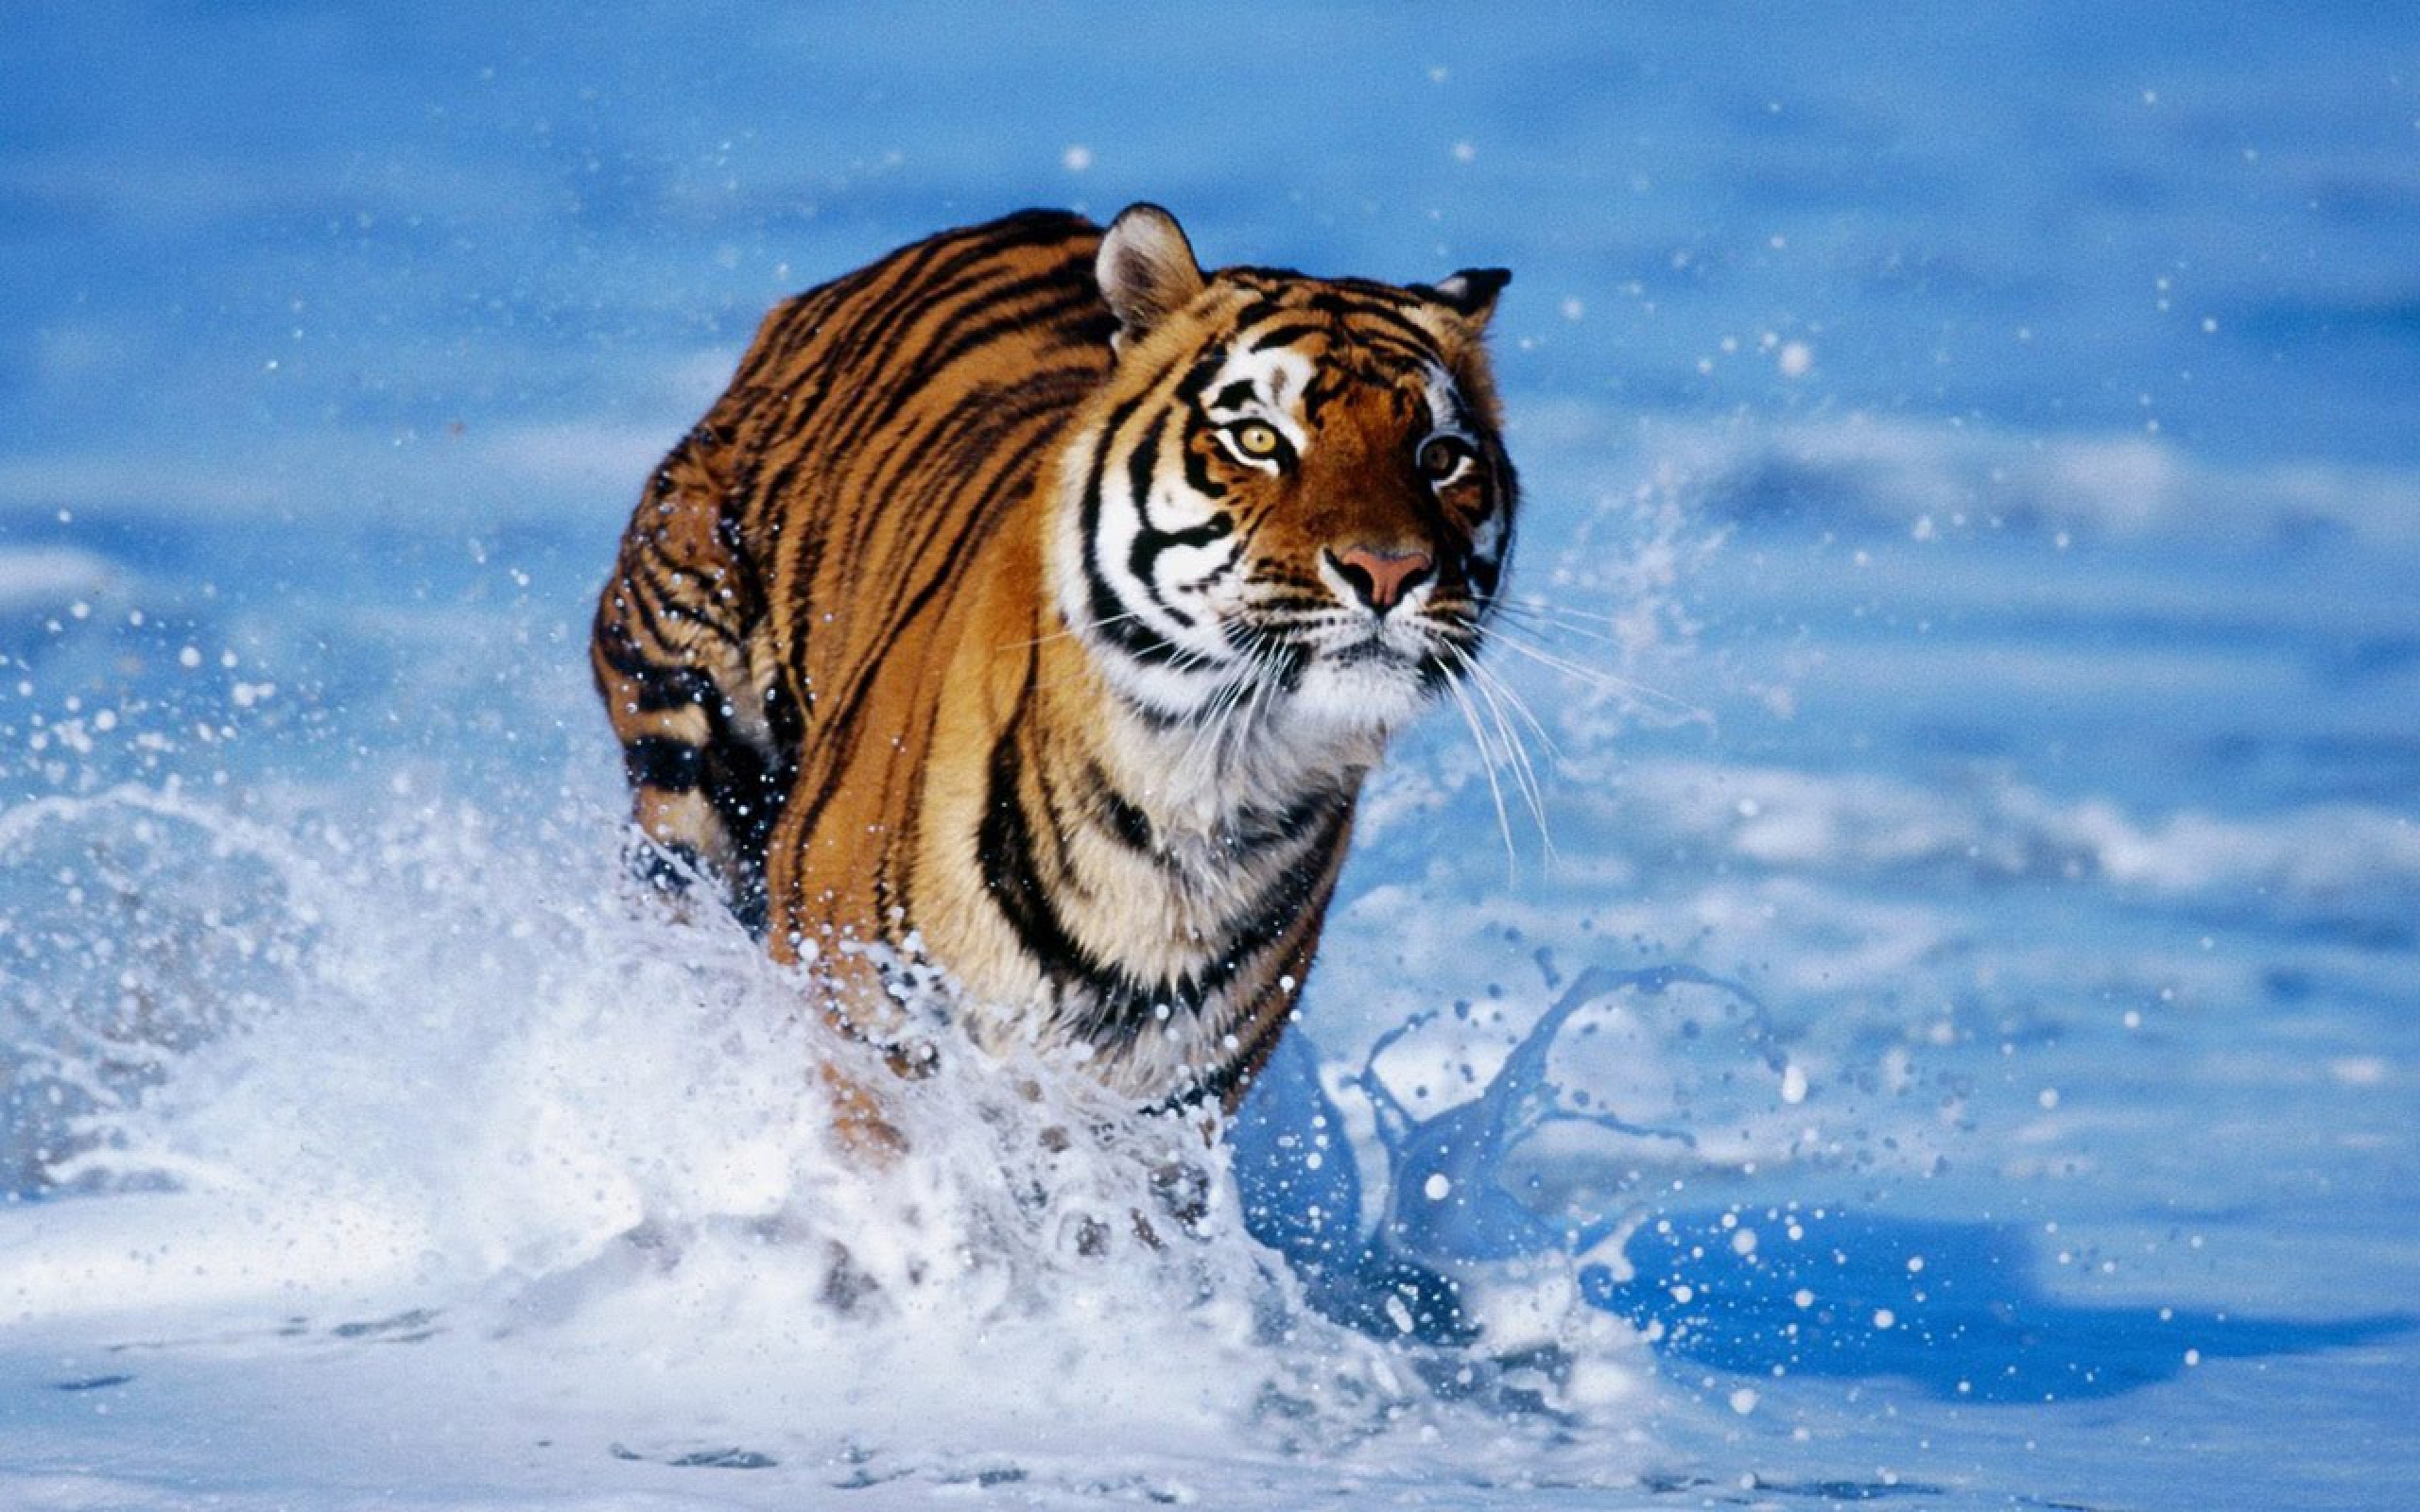 Tiger Wallpaper Image Photos Pictures Background